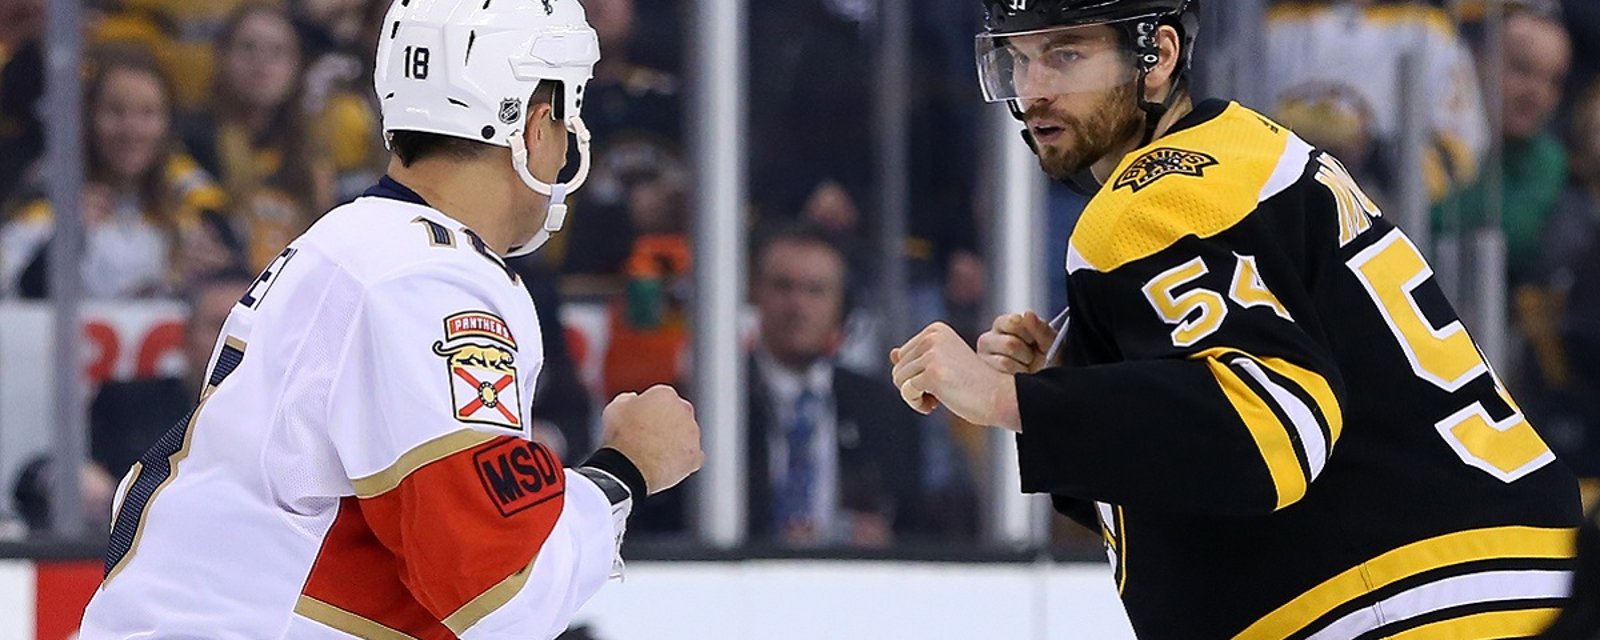 NHL enforcer Adam McQuaid traded just one hour before the deadline.